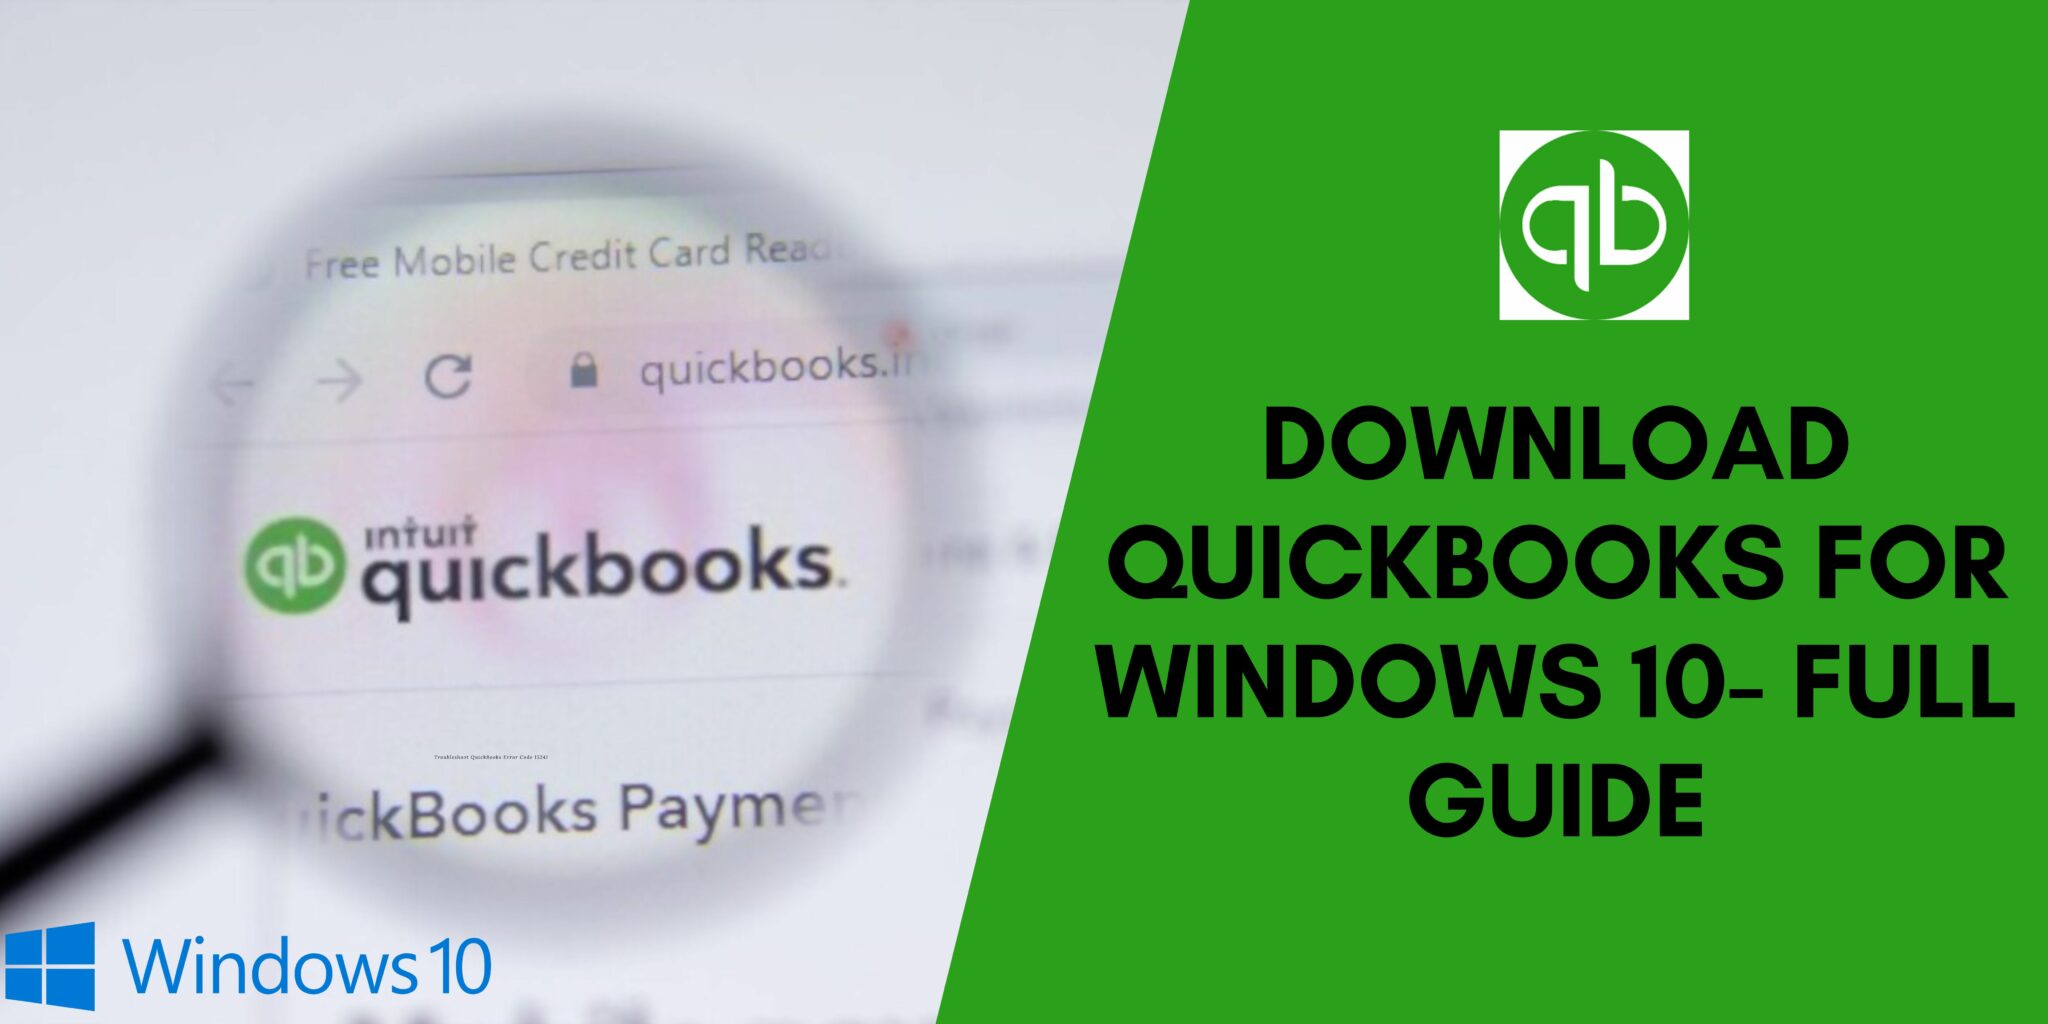 How to Download QuickBooks for Windows 10 Guide)